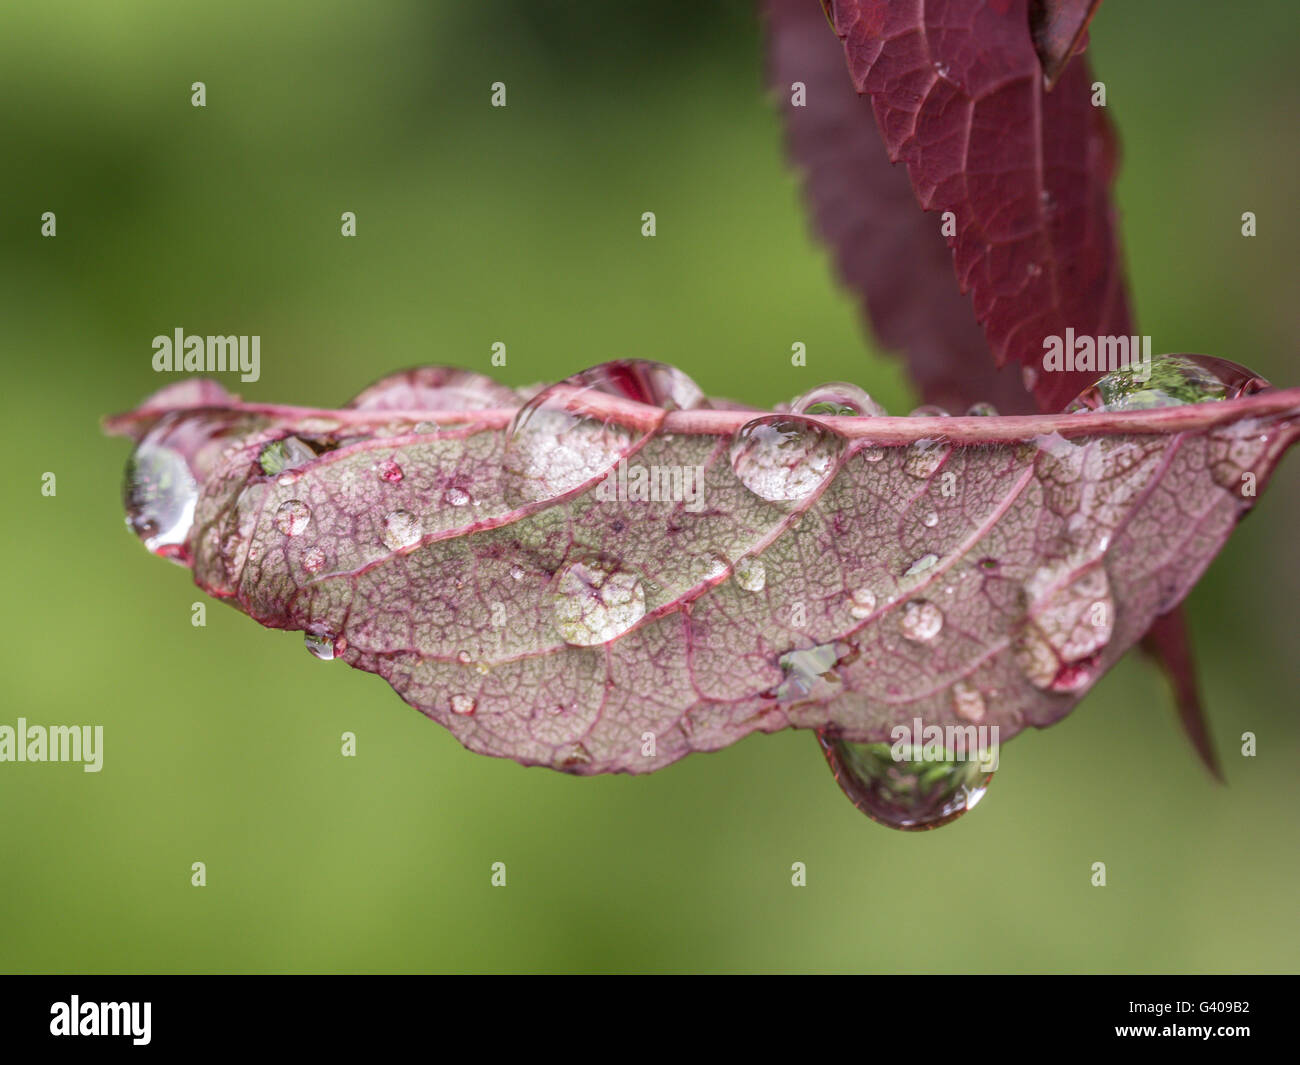 Water drops on leafs in spring after fresh rain Stock Photo